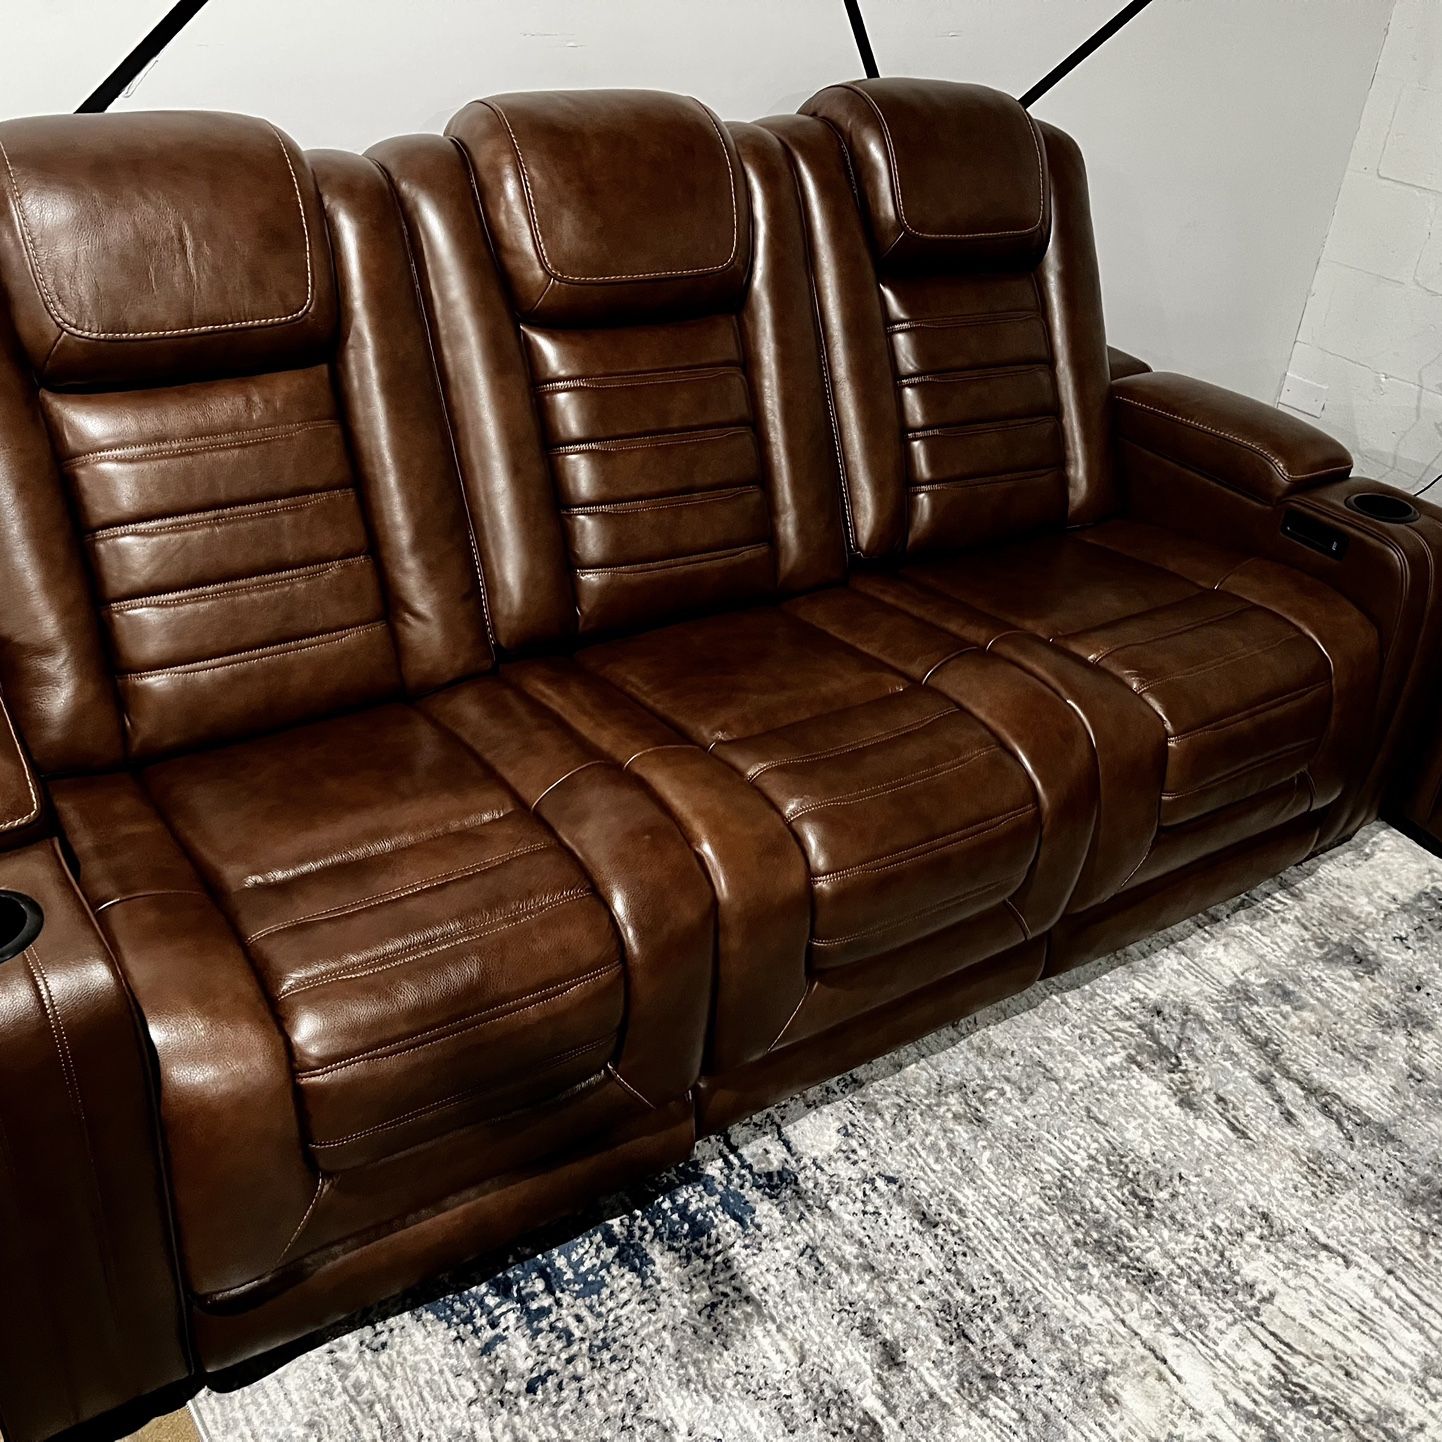 Ashley Brand Leather Set Of Recliners, Massage,& Heaters. Save $1500 From Retail